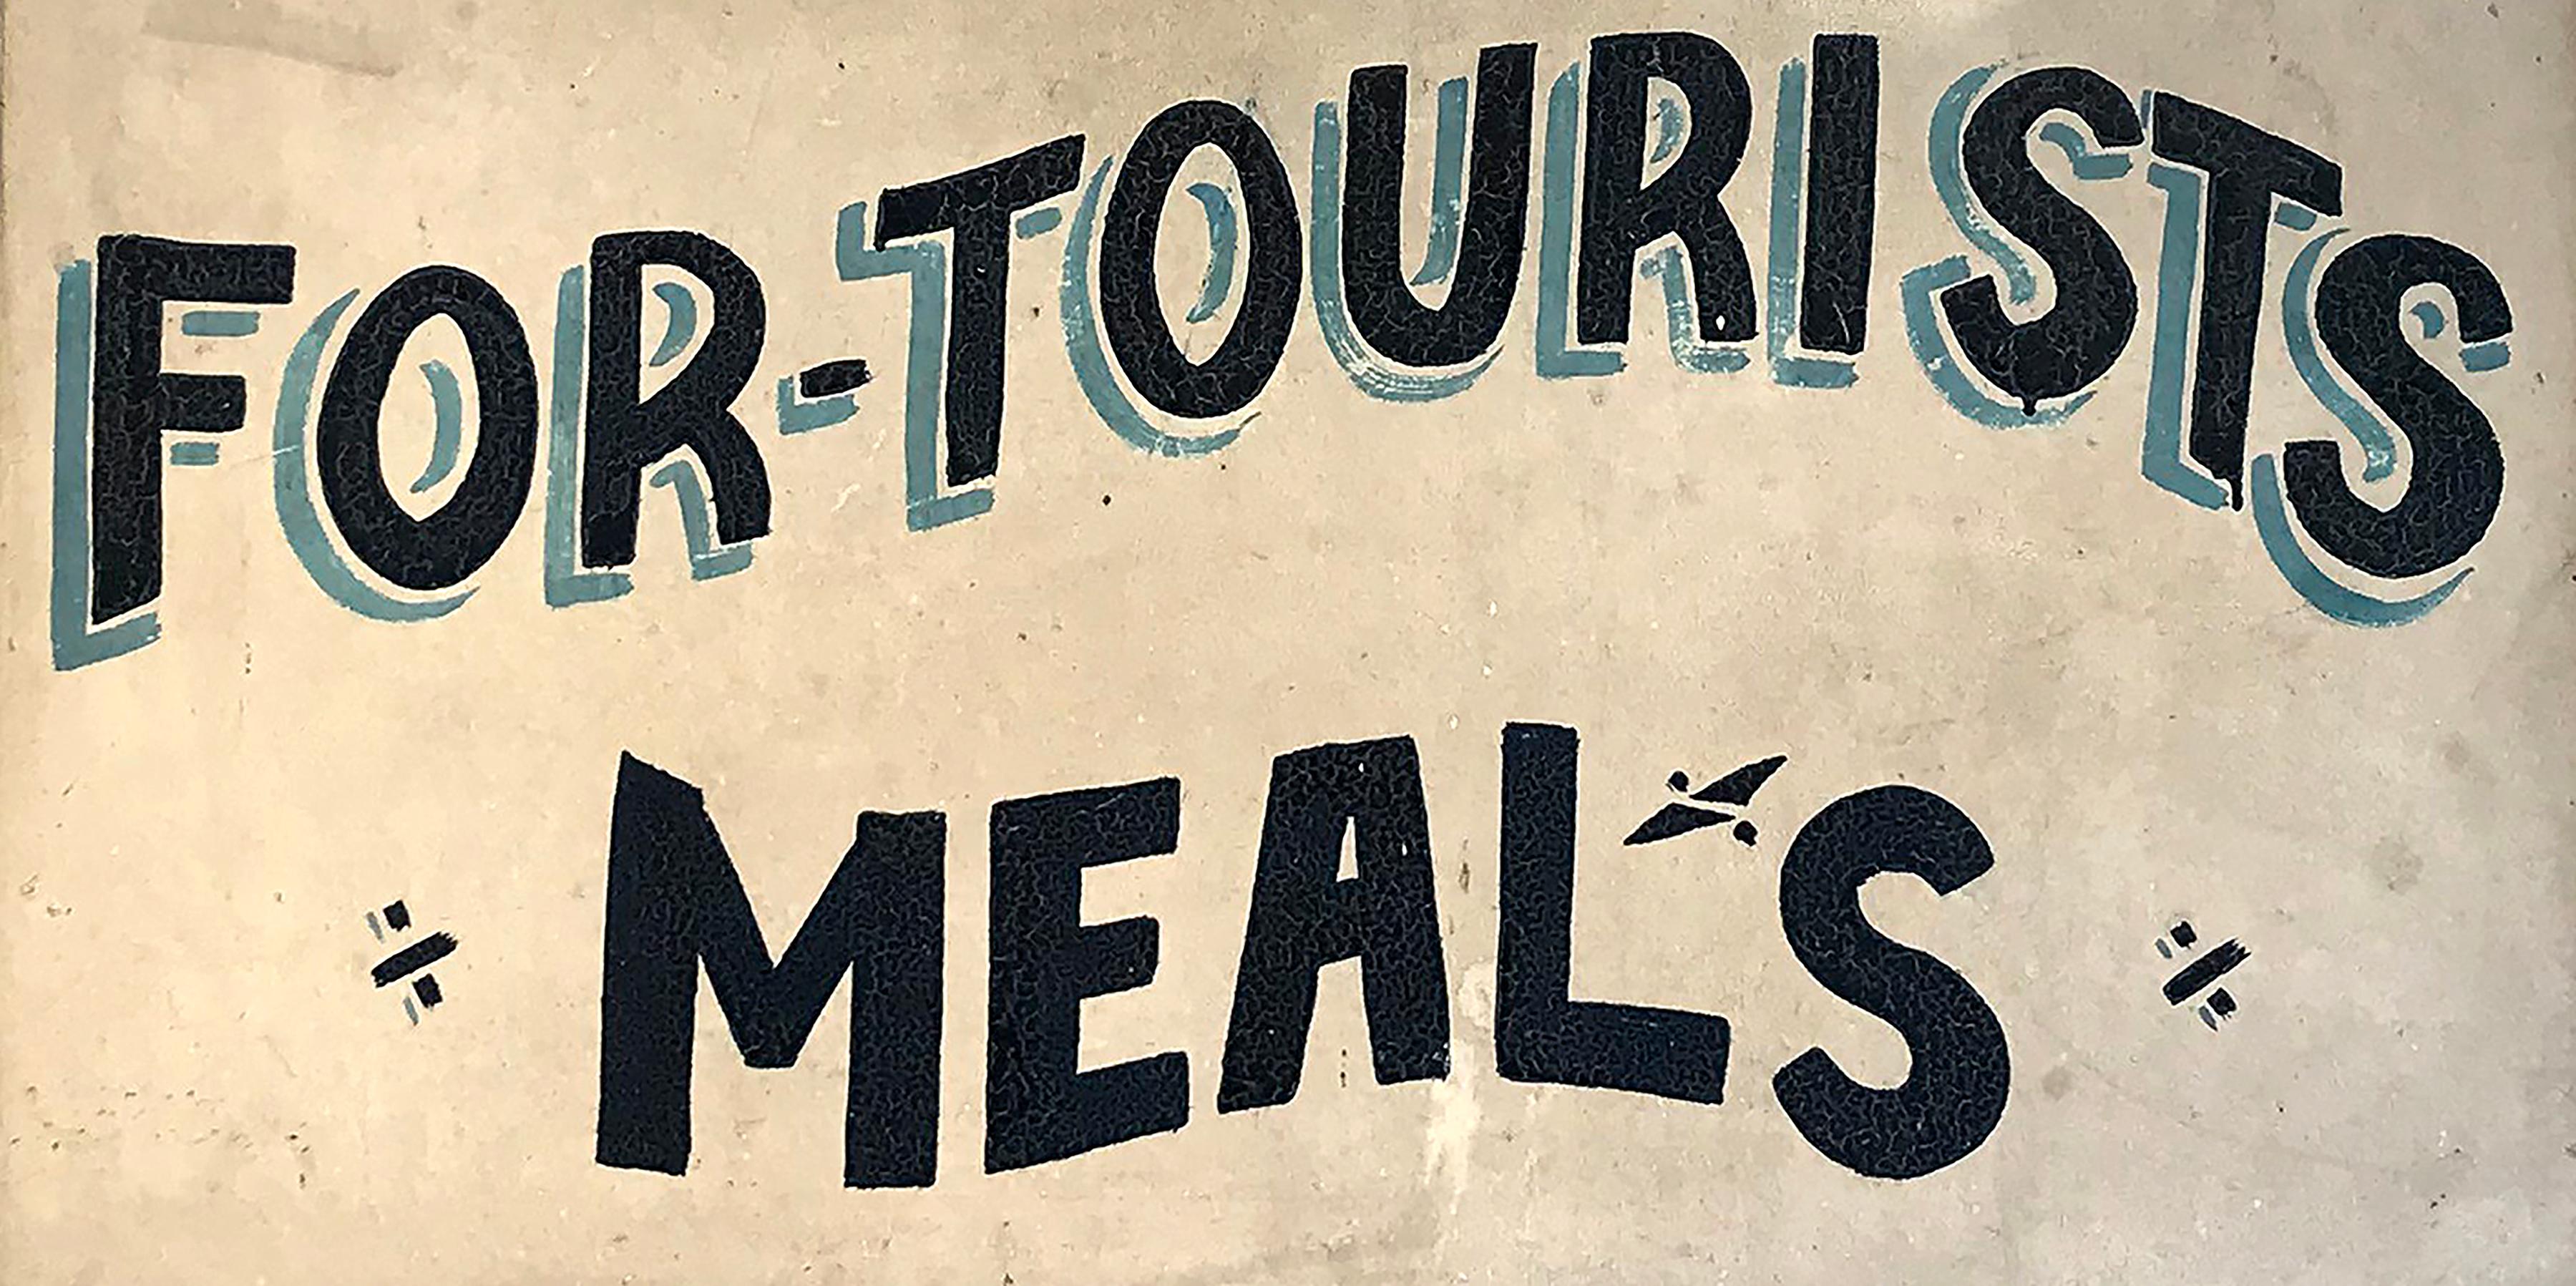 Folk Art Trade Sign, Rooms or Tourists, Meals